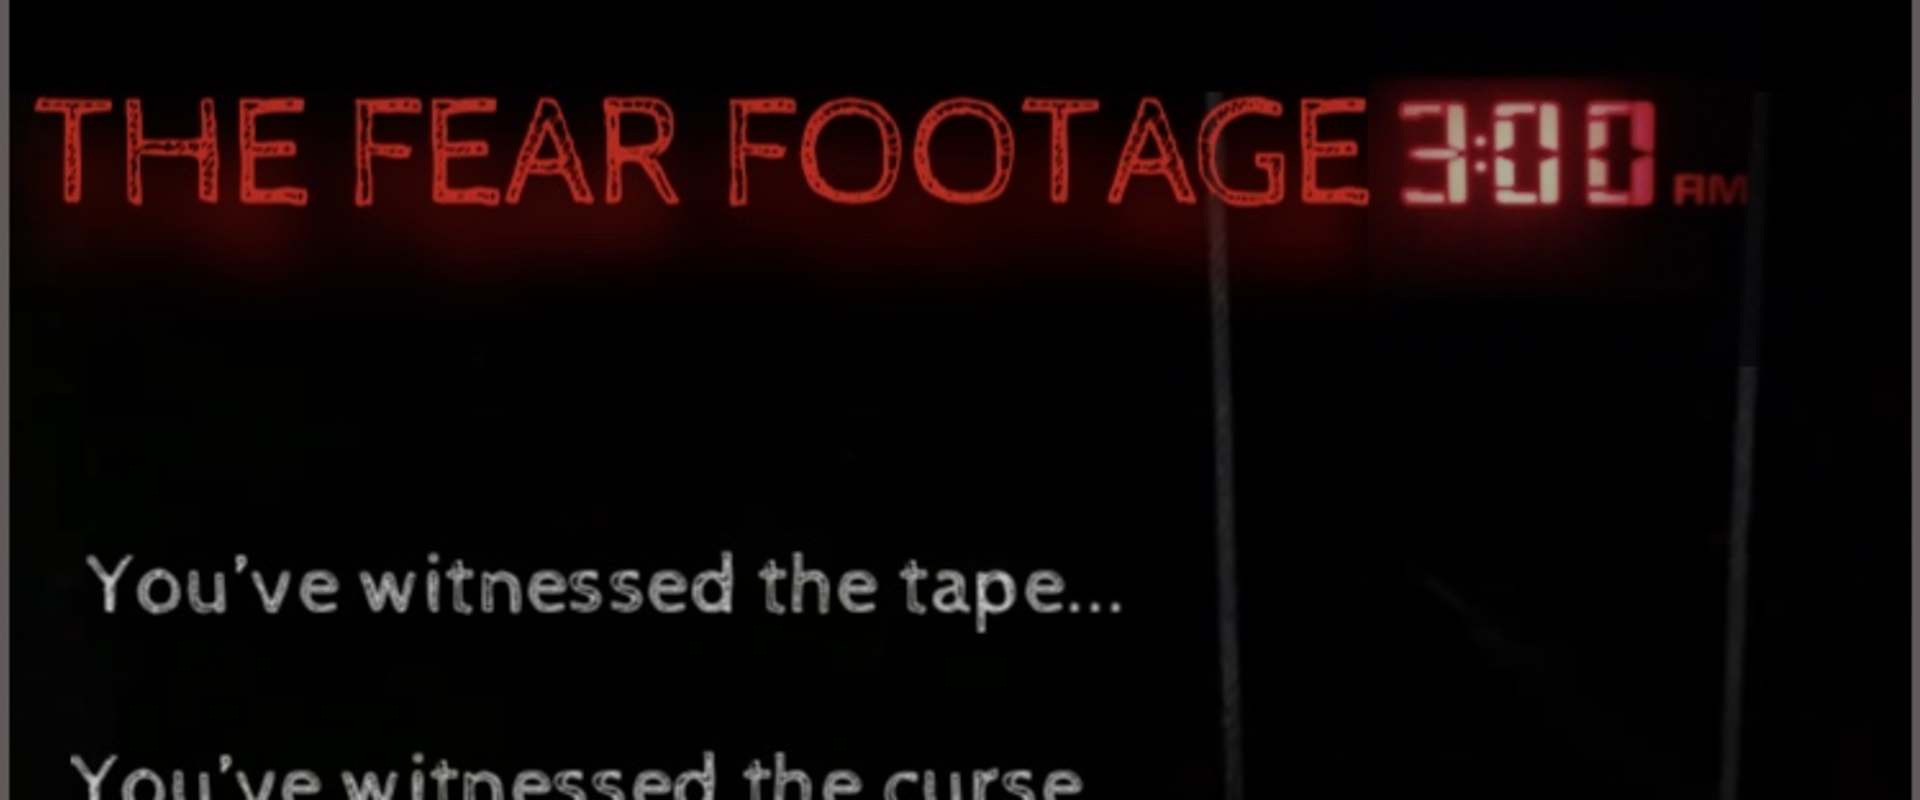 The Fear Footage 3AM background 2